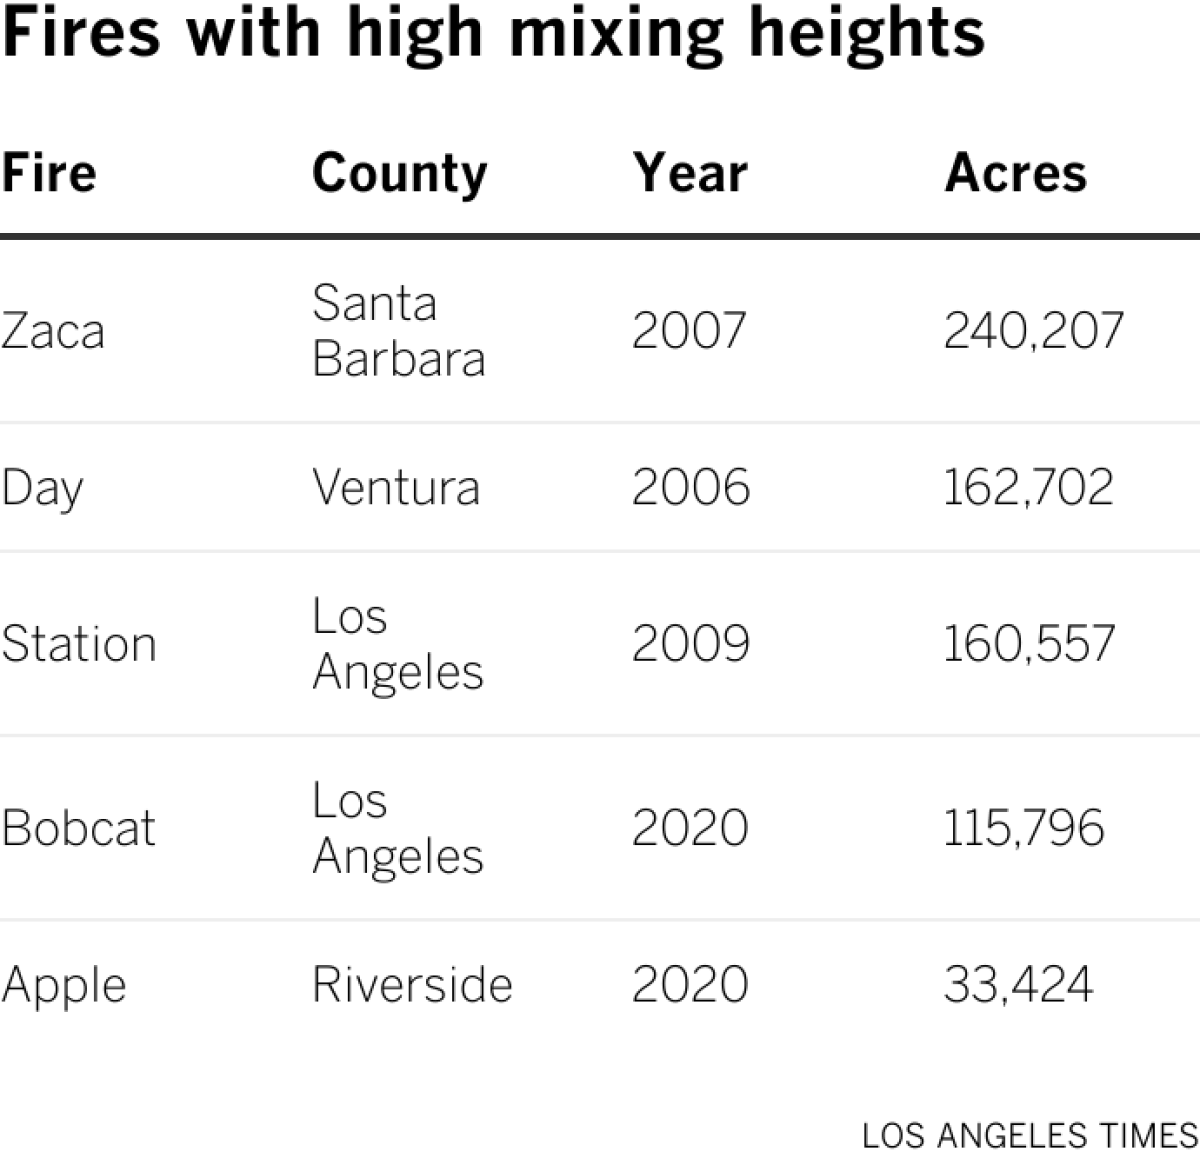 Fires with high mixing heights